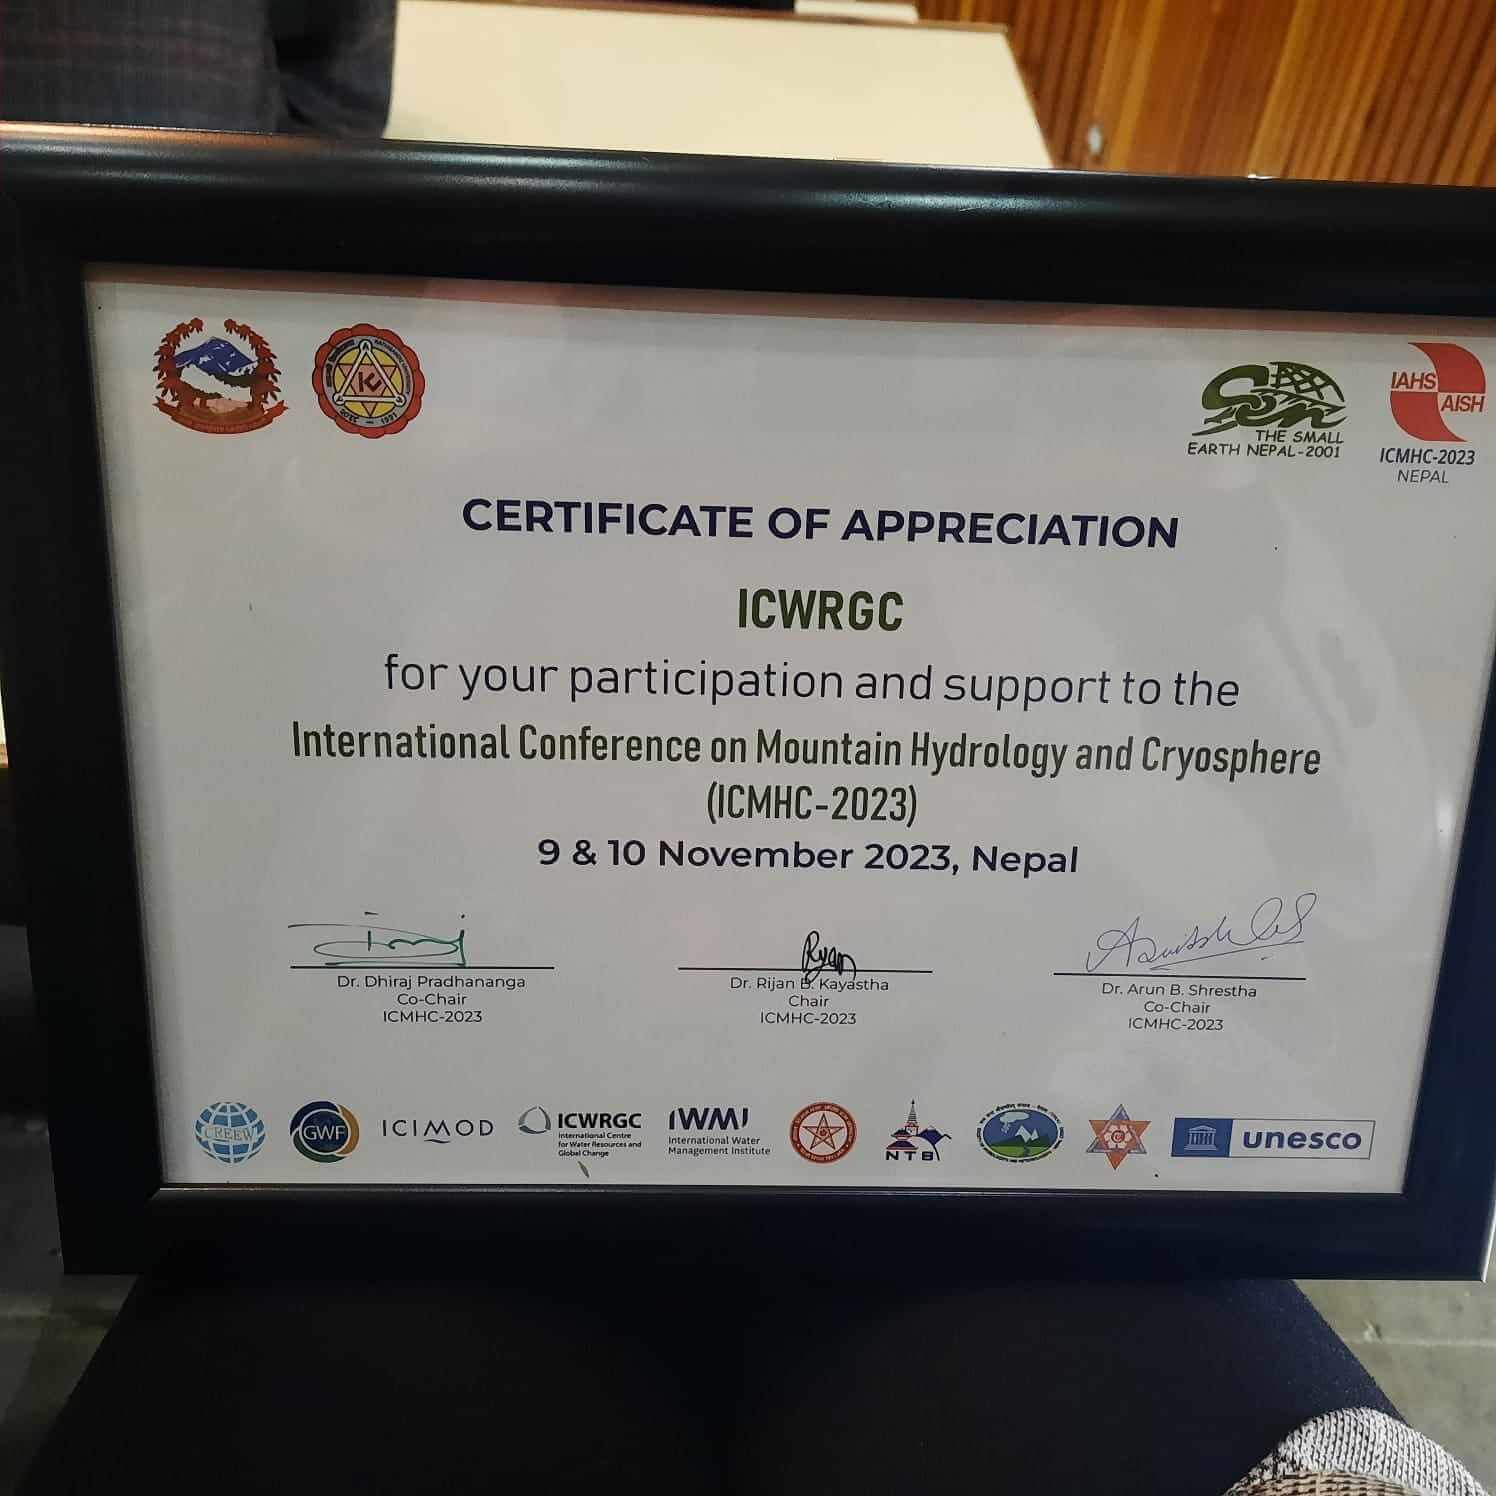 ICMHC 2023 certificate of support appreciation for ICWRGC